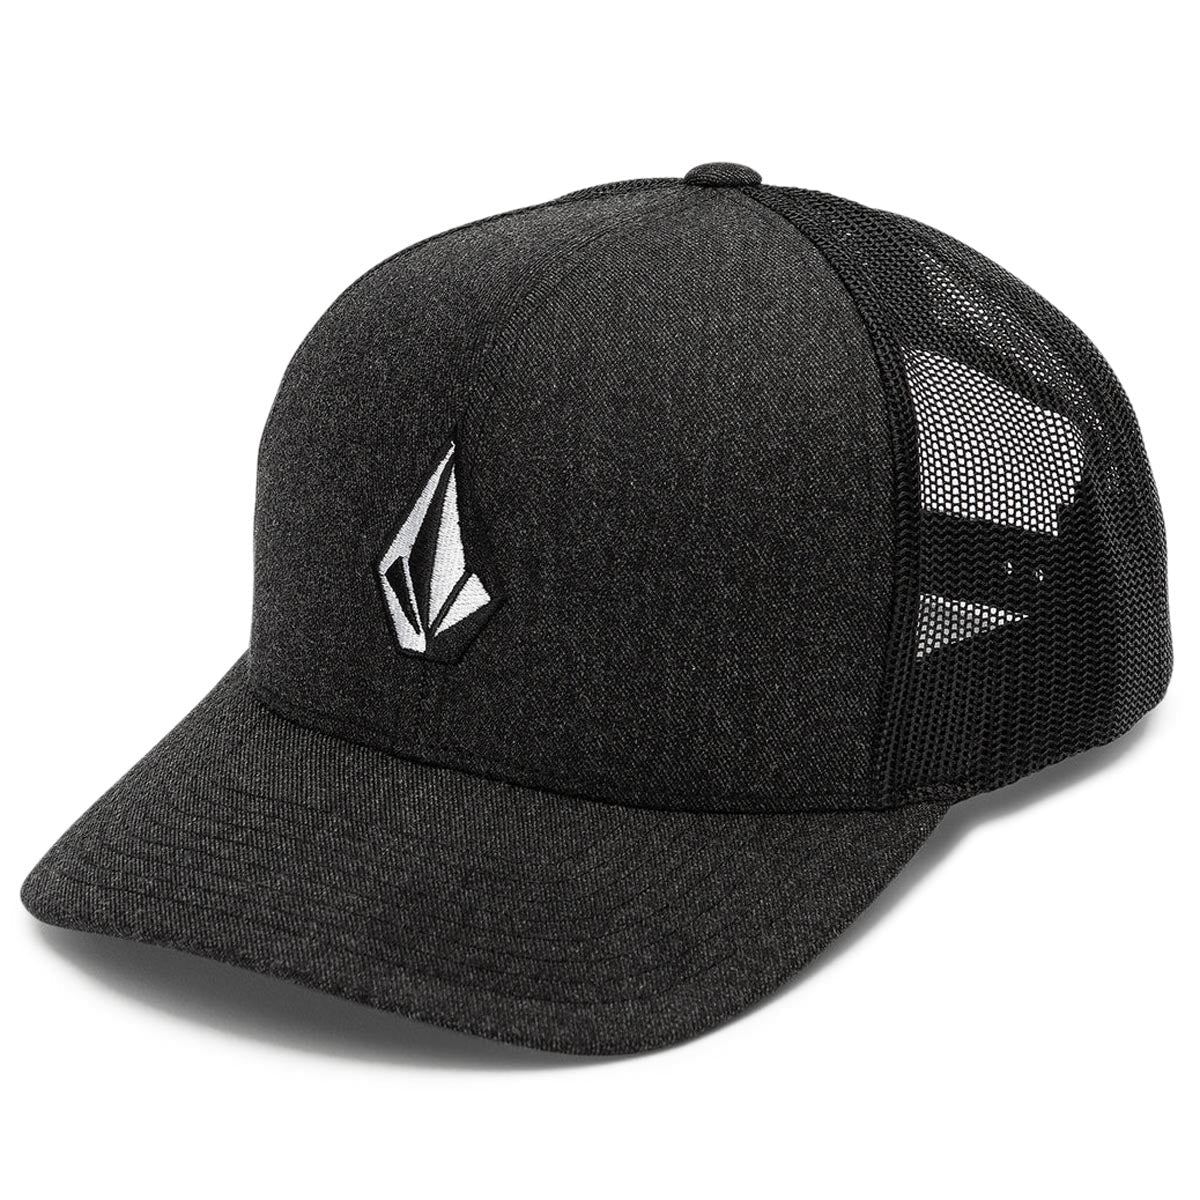 Volcom Full Stone Cheese Hat - Charcoal Heather Grey image 1